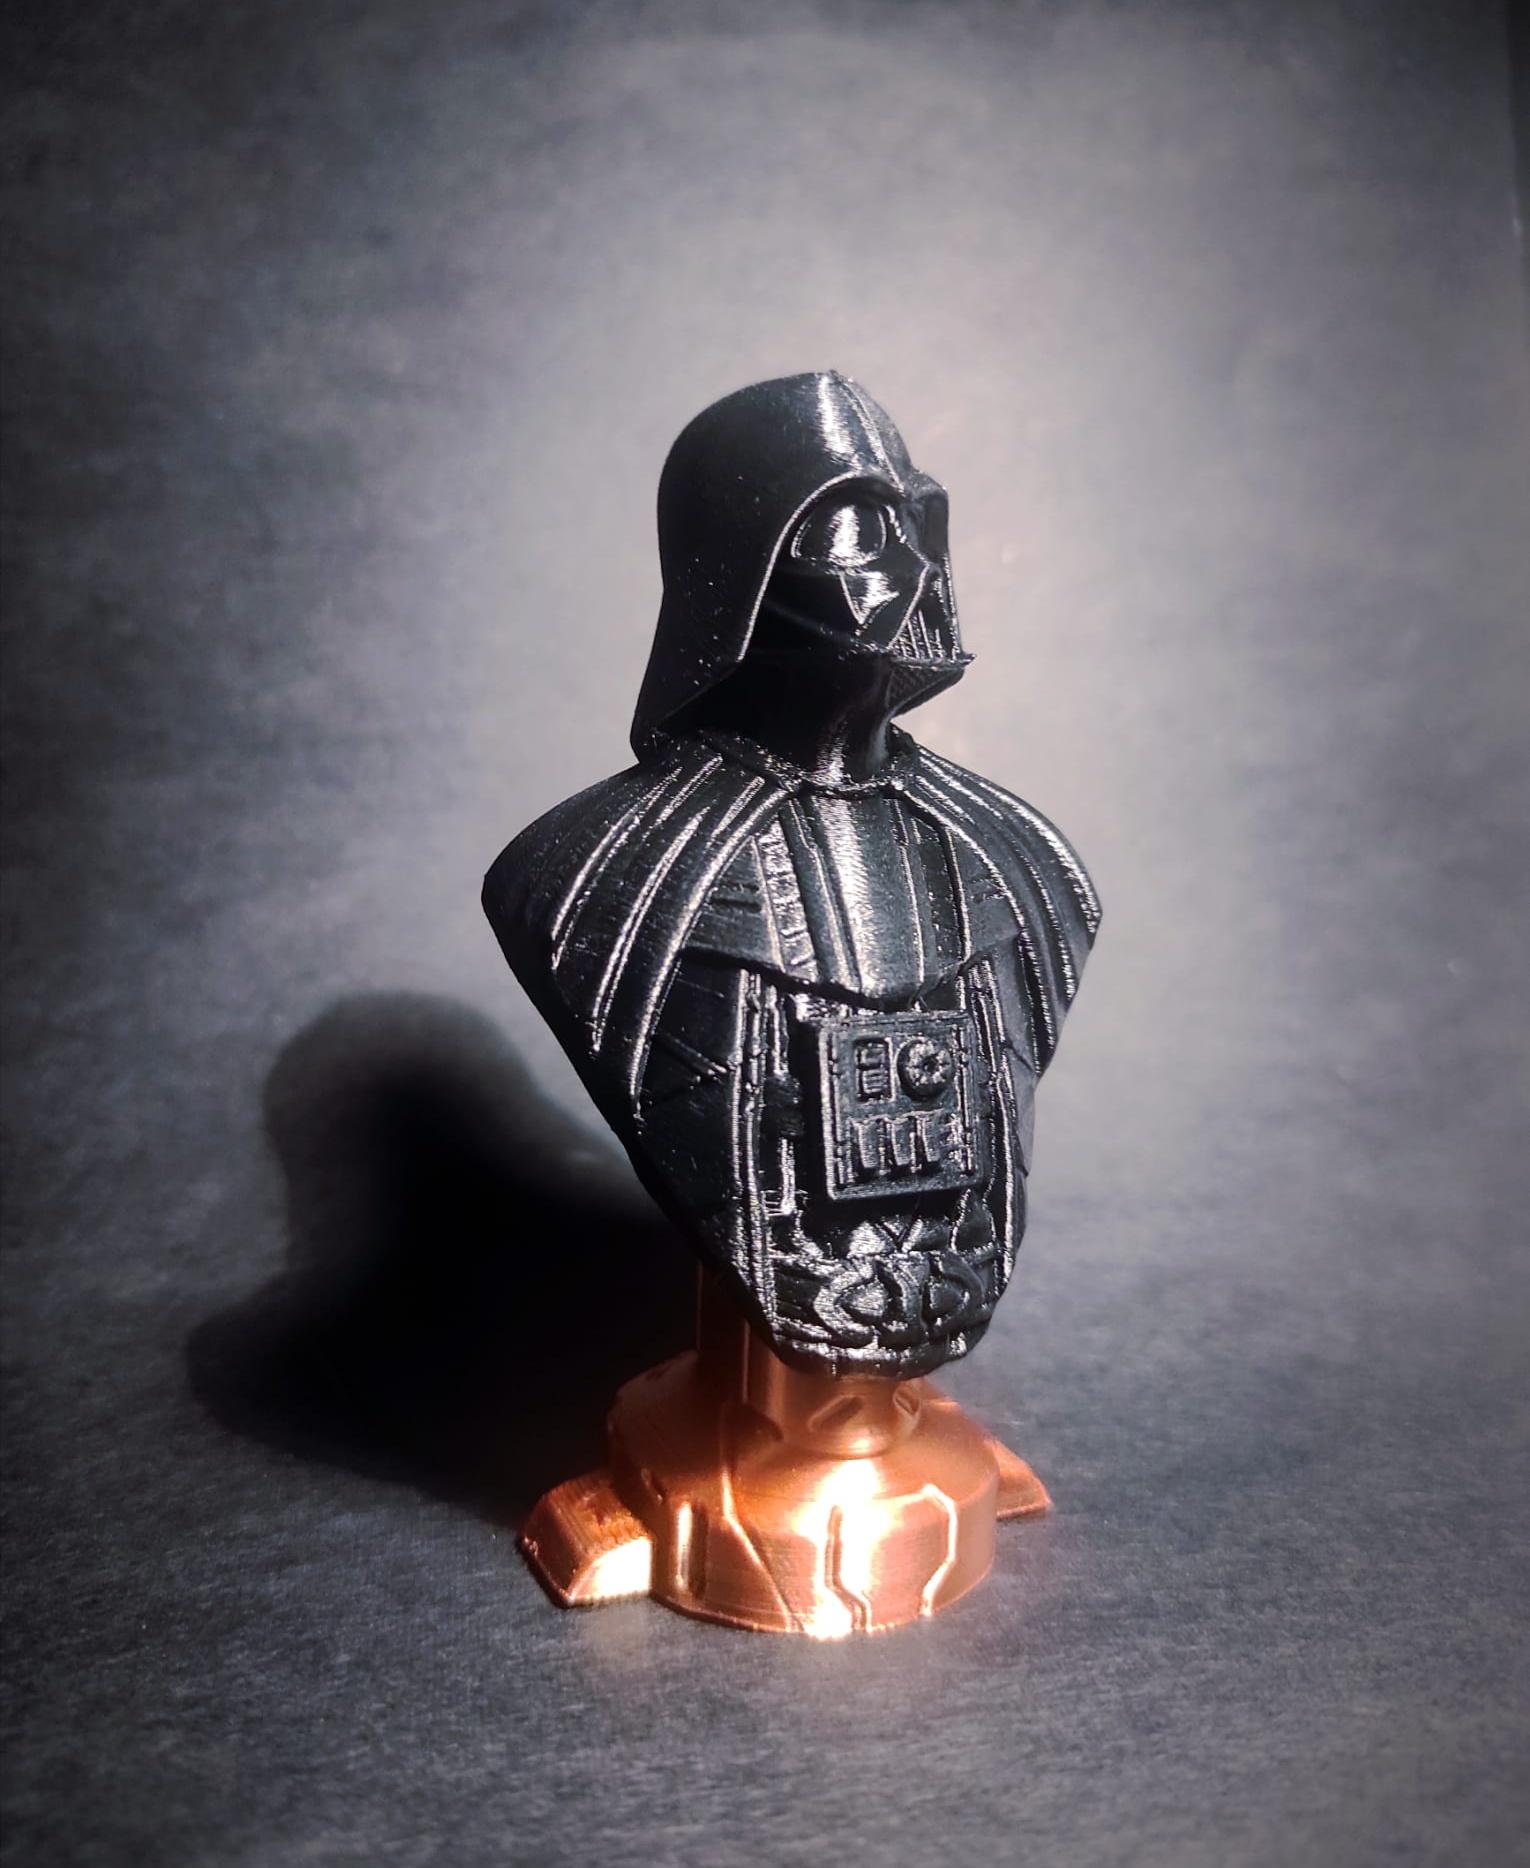 Darth Vader bust (fan art) - Good job on the model!

Check my insta page @3Doodling for more makes! ;) - 3d model